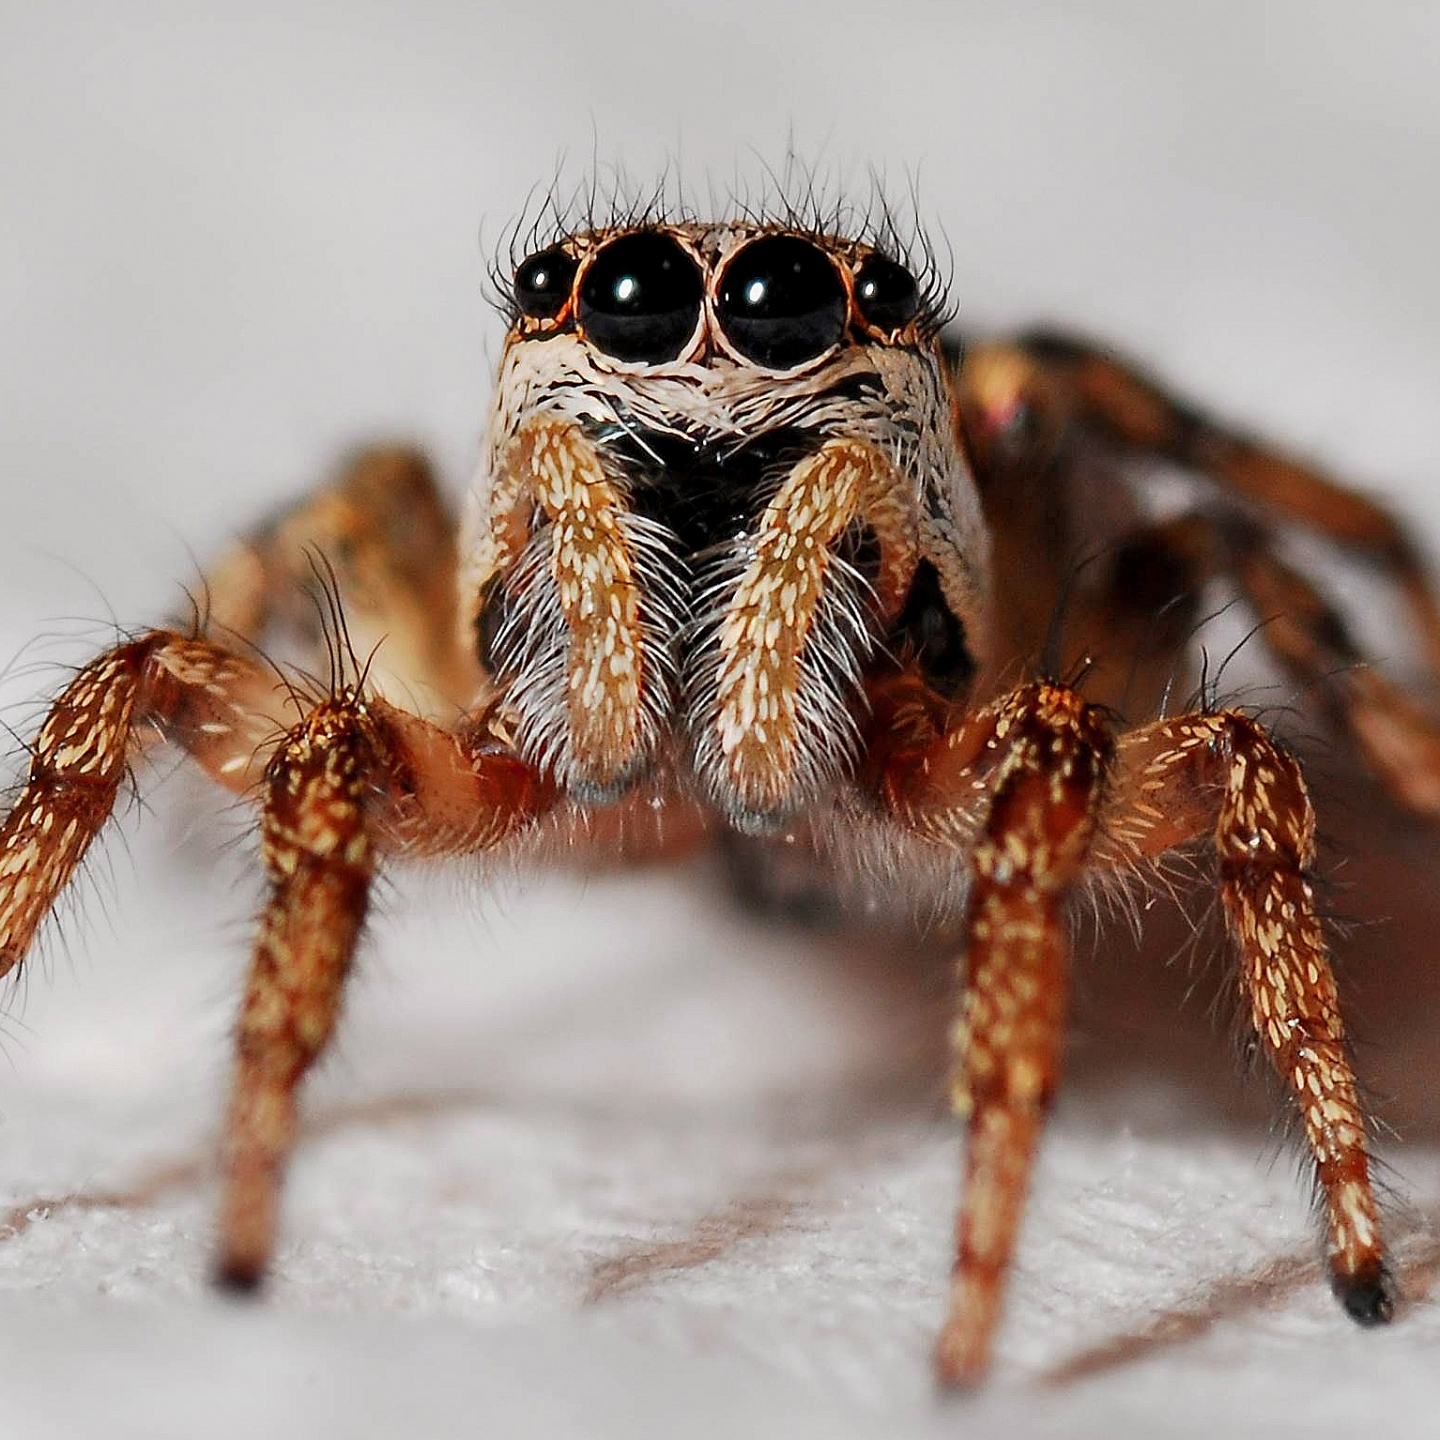 A close up of a jumping spider on a white surface